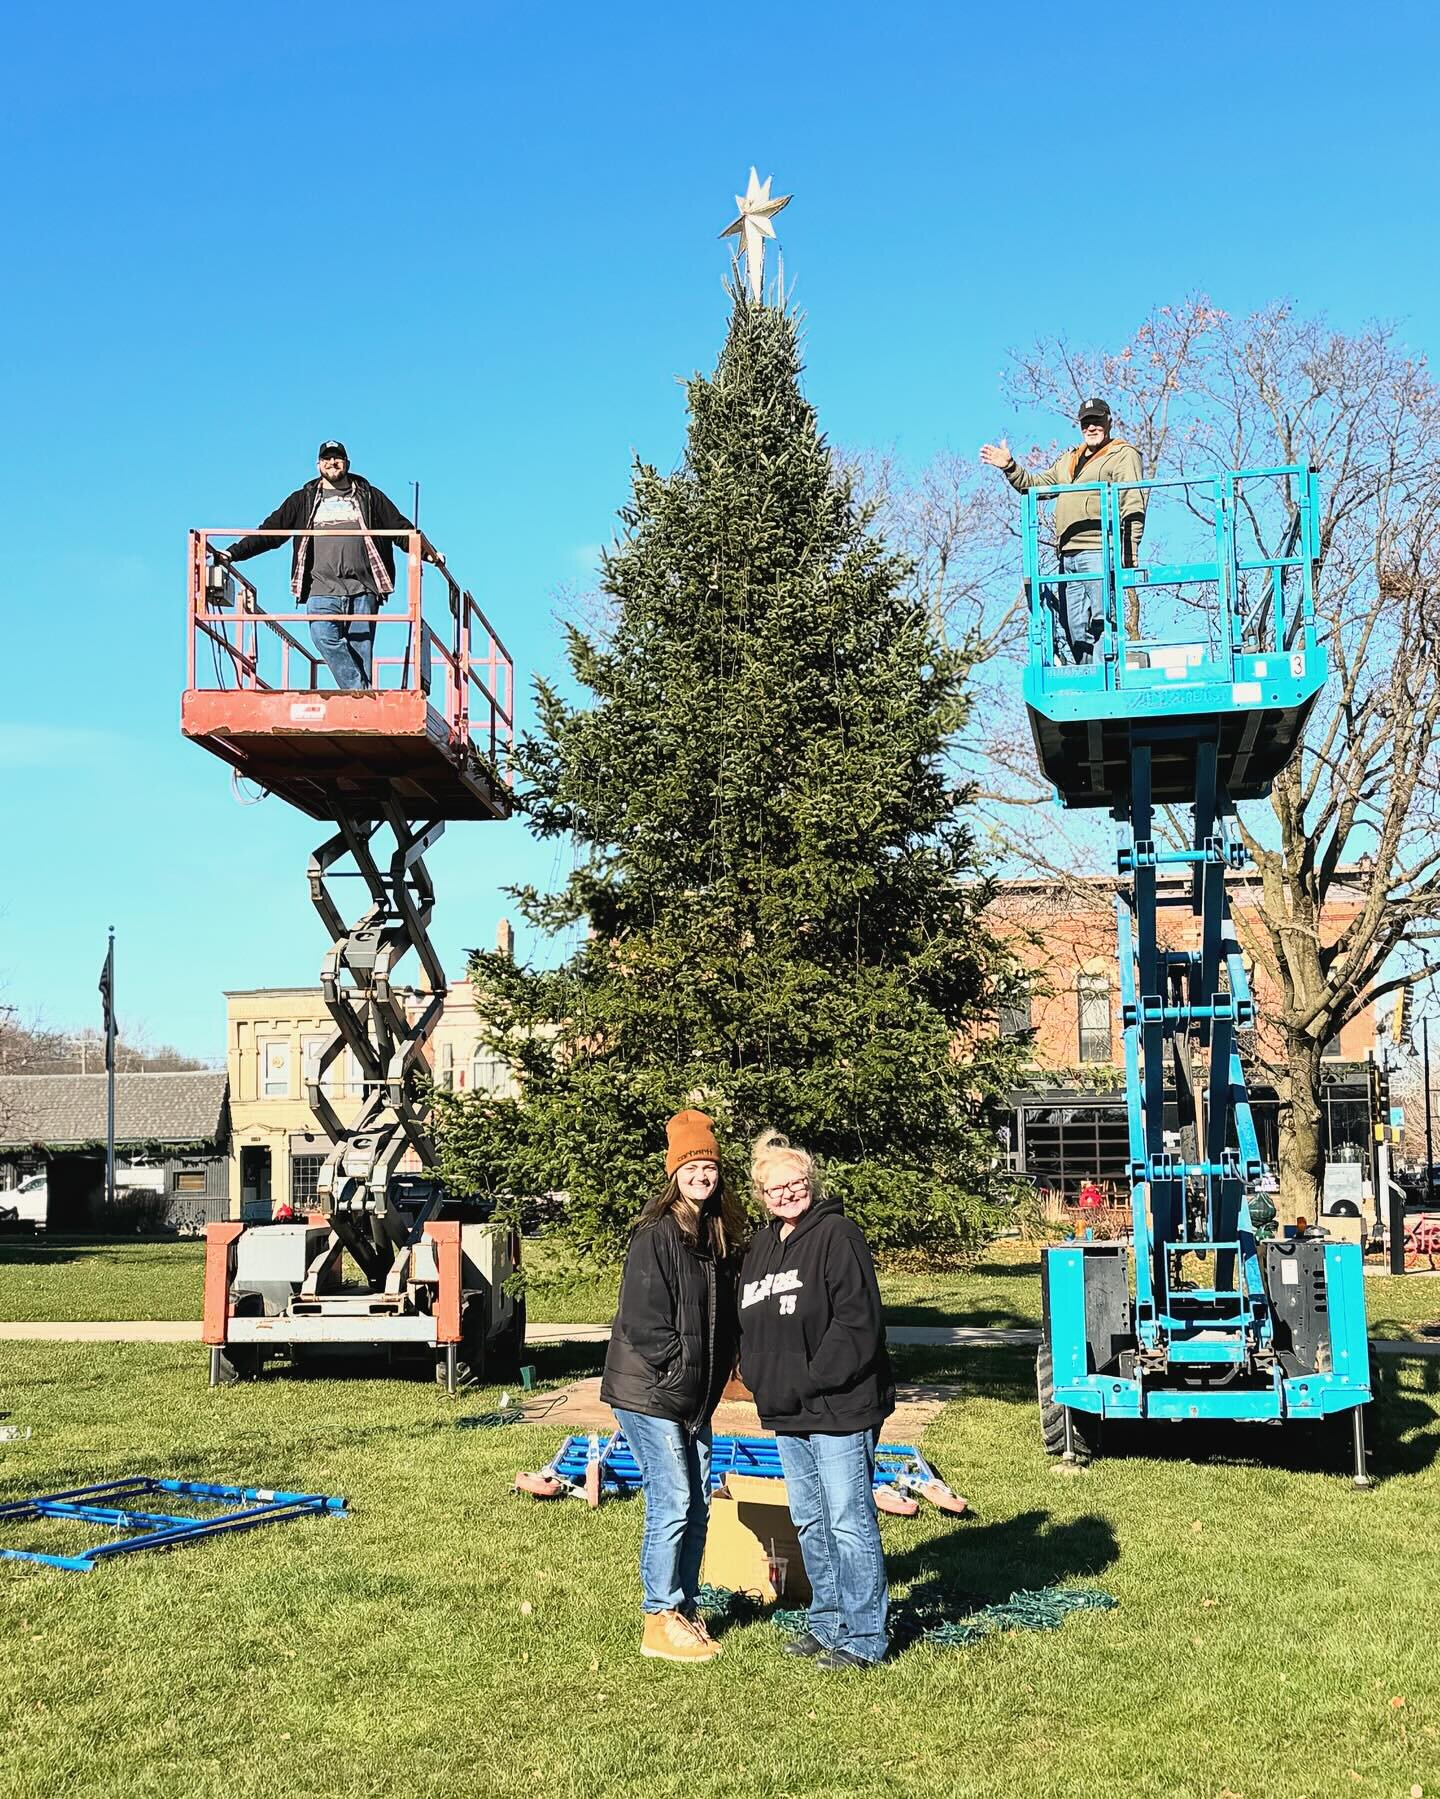 The community is hard at work getting the town lit up for Candlelight Walk! Come see the decorations and support small businesses this Saturday from 3-8pm! 🎄 

#candlelightwalk #smalltownchristmas #christmas #illinois #christmasmagic #christmascount